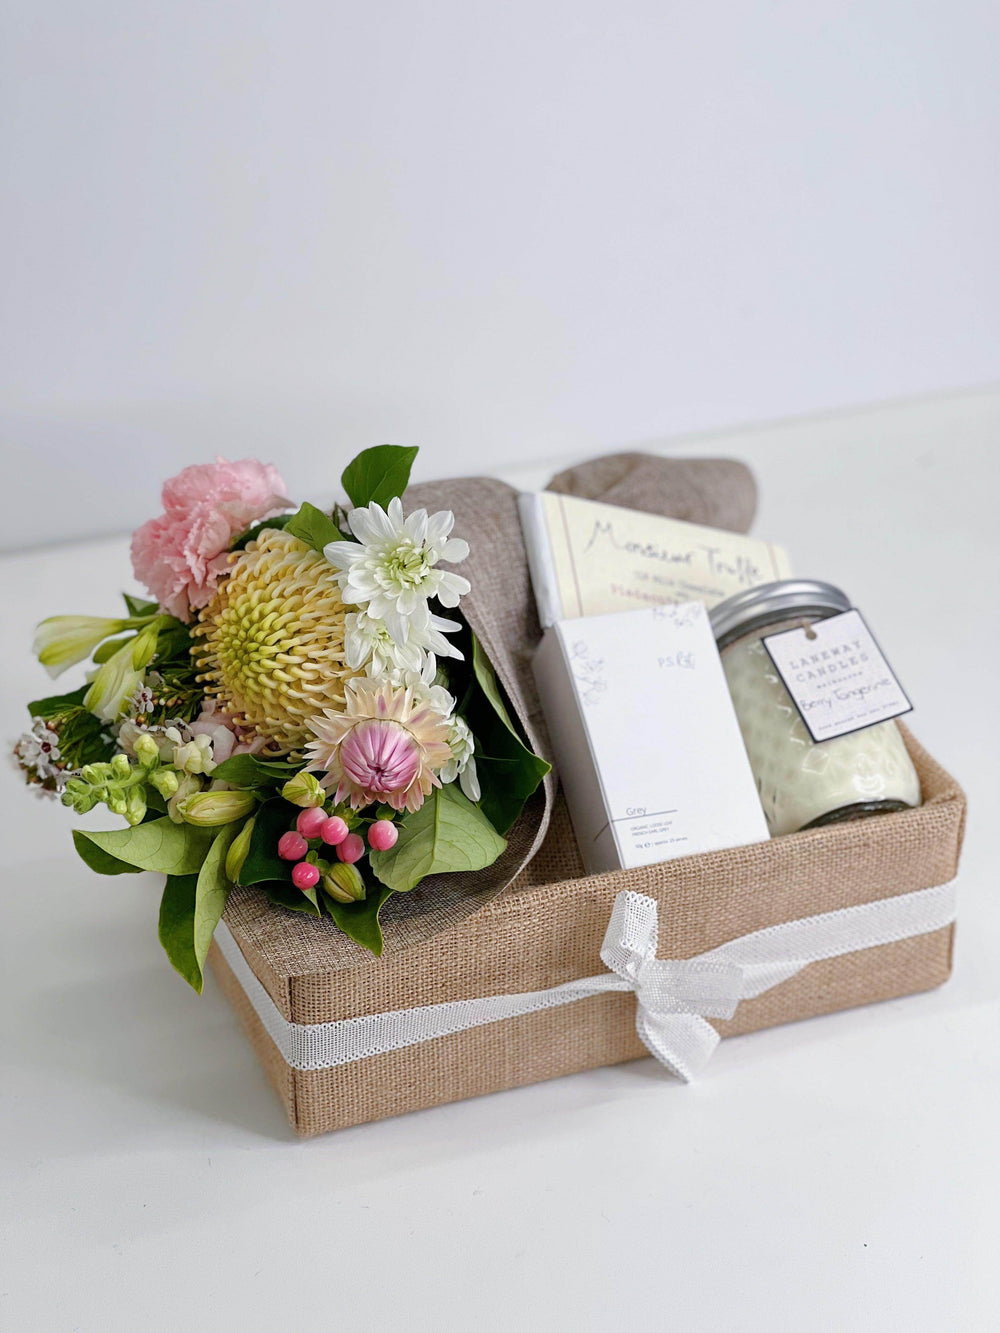 The Little Market Bunch Gift Box shot by The Little Market Bunch in Melbourne.